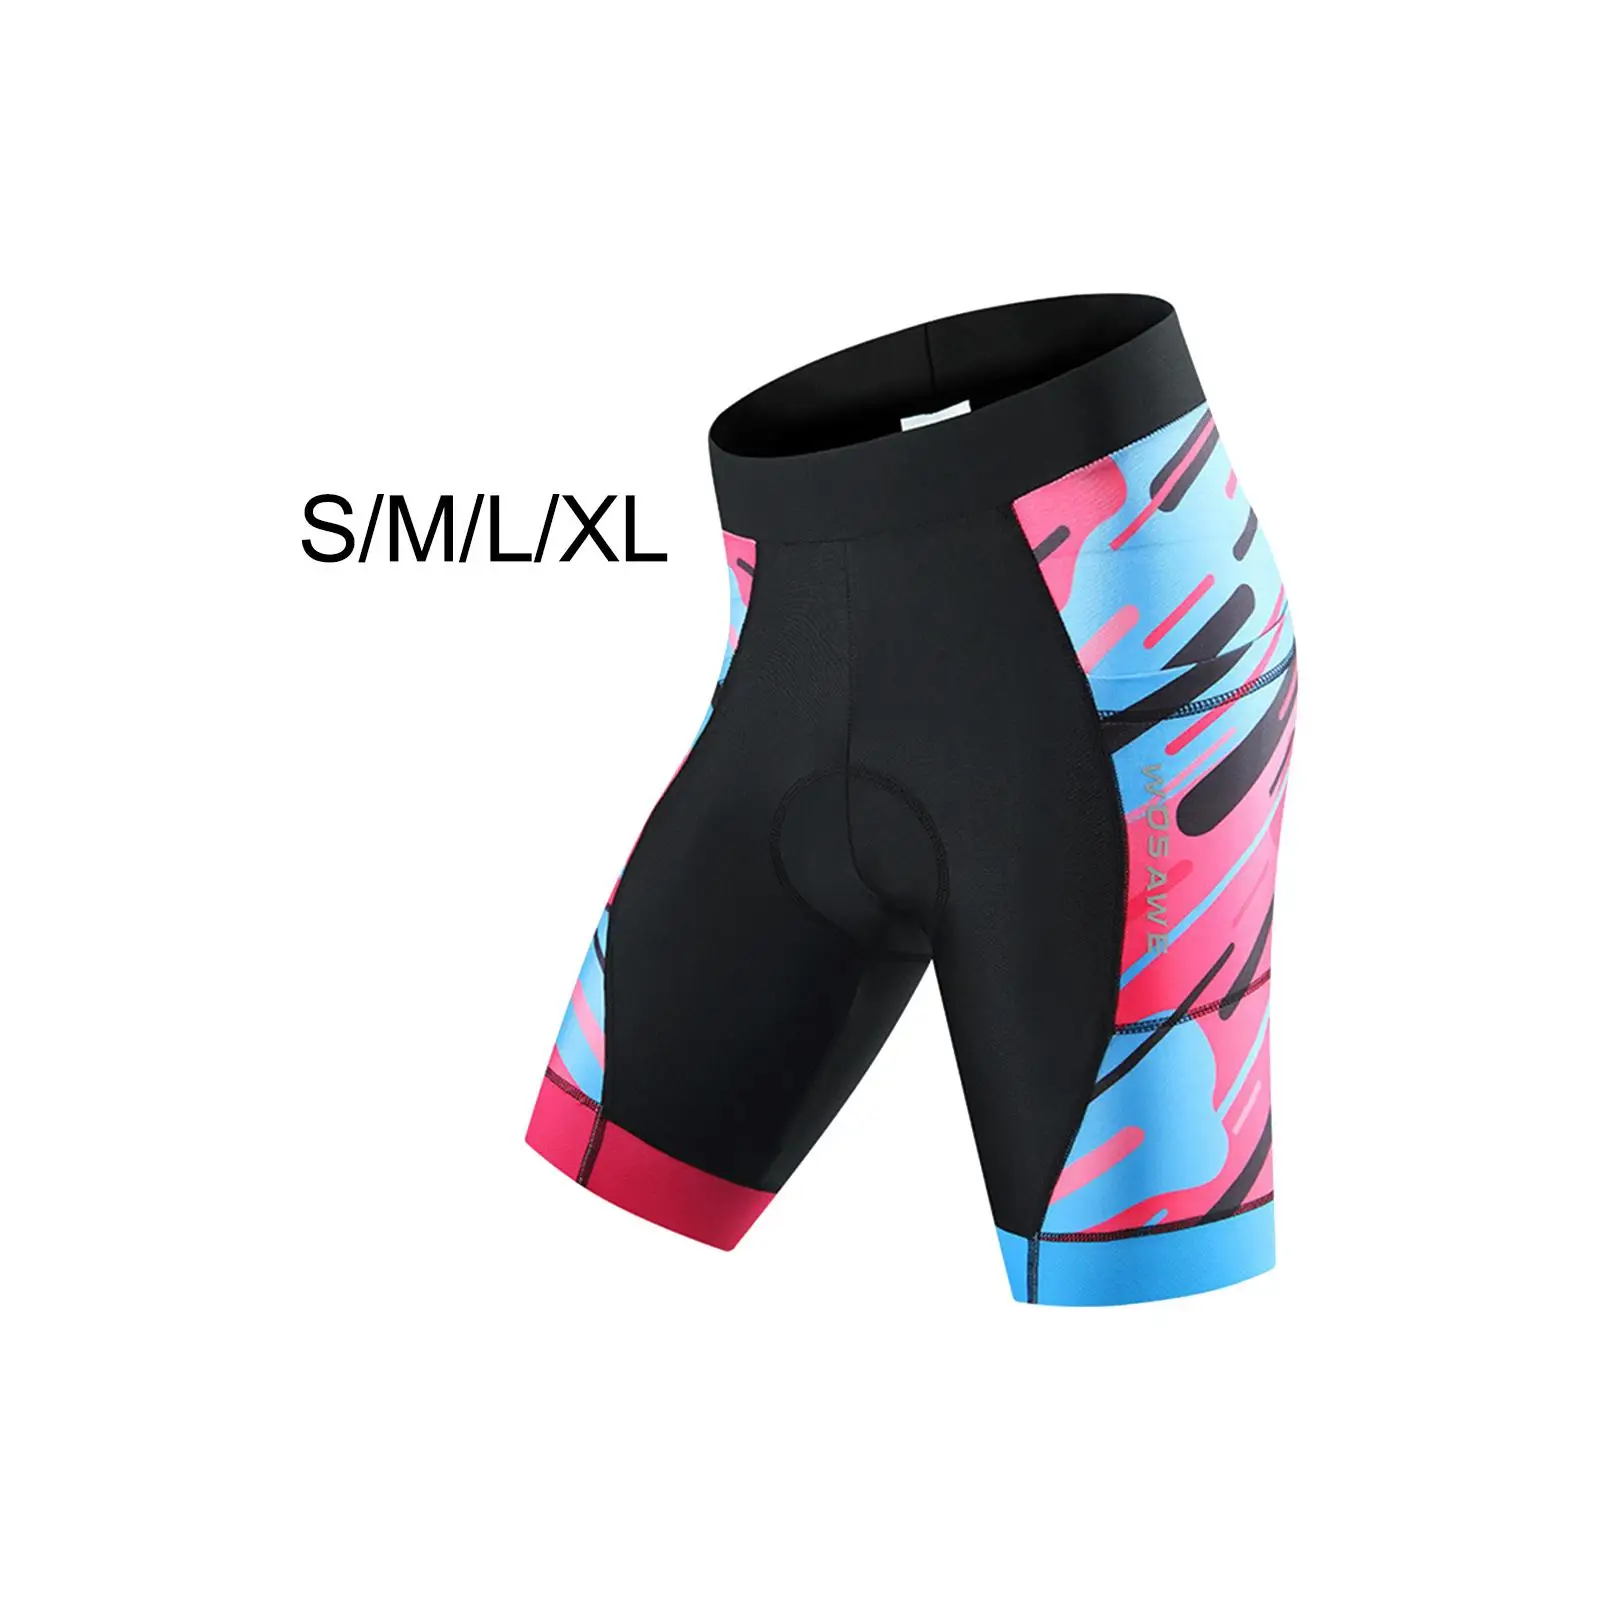 Outdoor Sports Underpants with Side Pockets Necessities Fashion Cycling Bike Shorts for Riding Sports Volleyball Dance Hiking